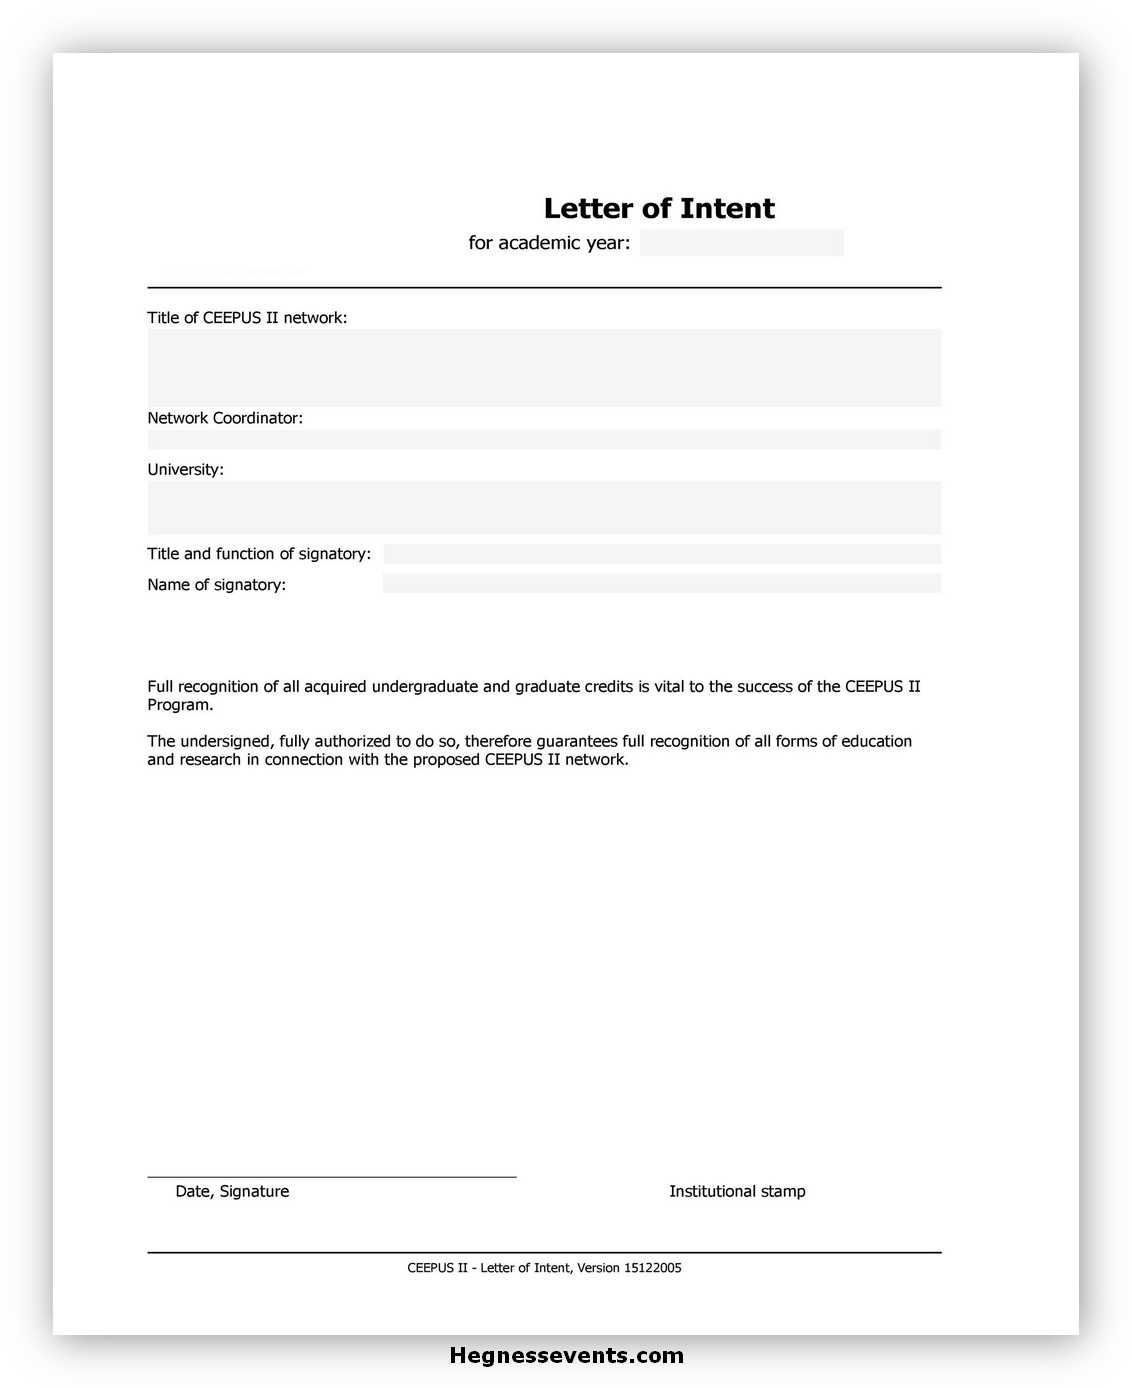 Letters of Intent Example 02